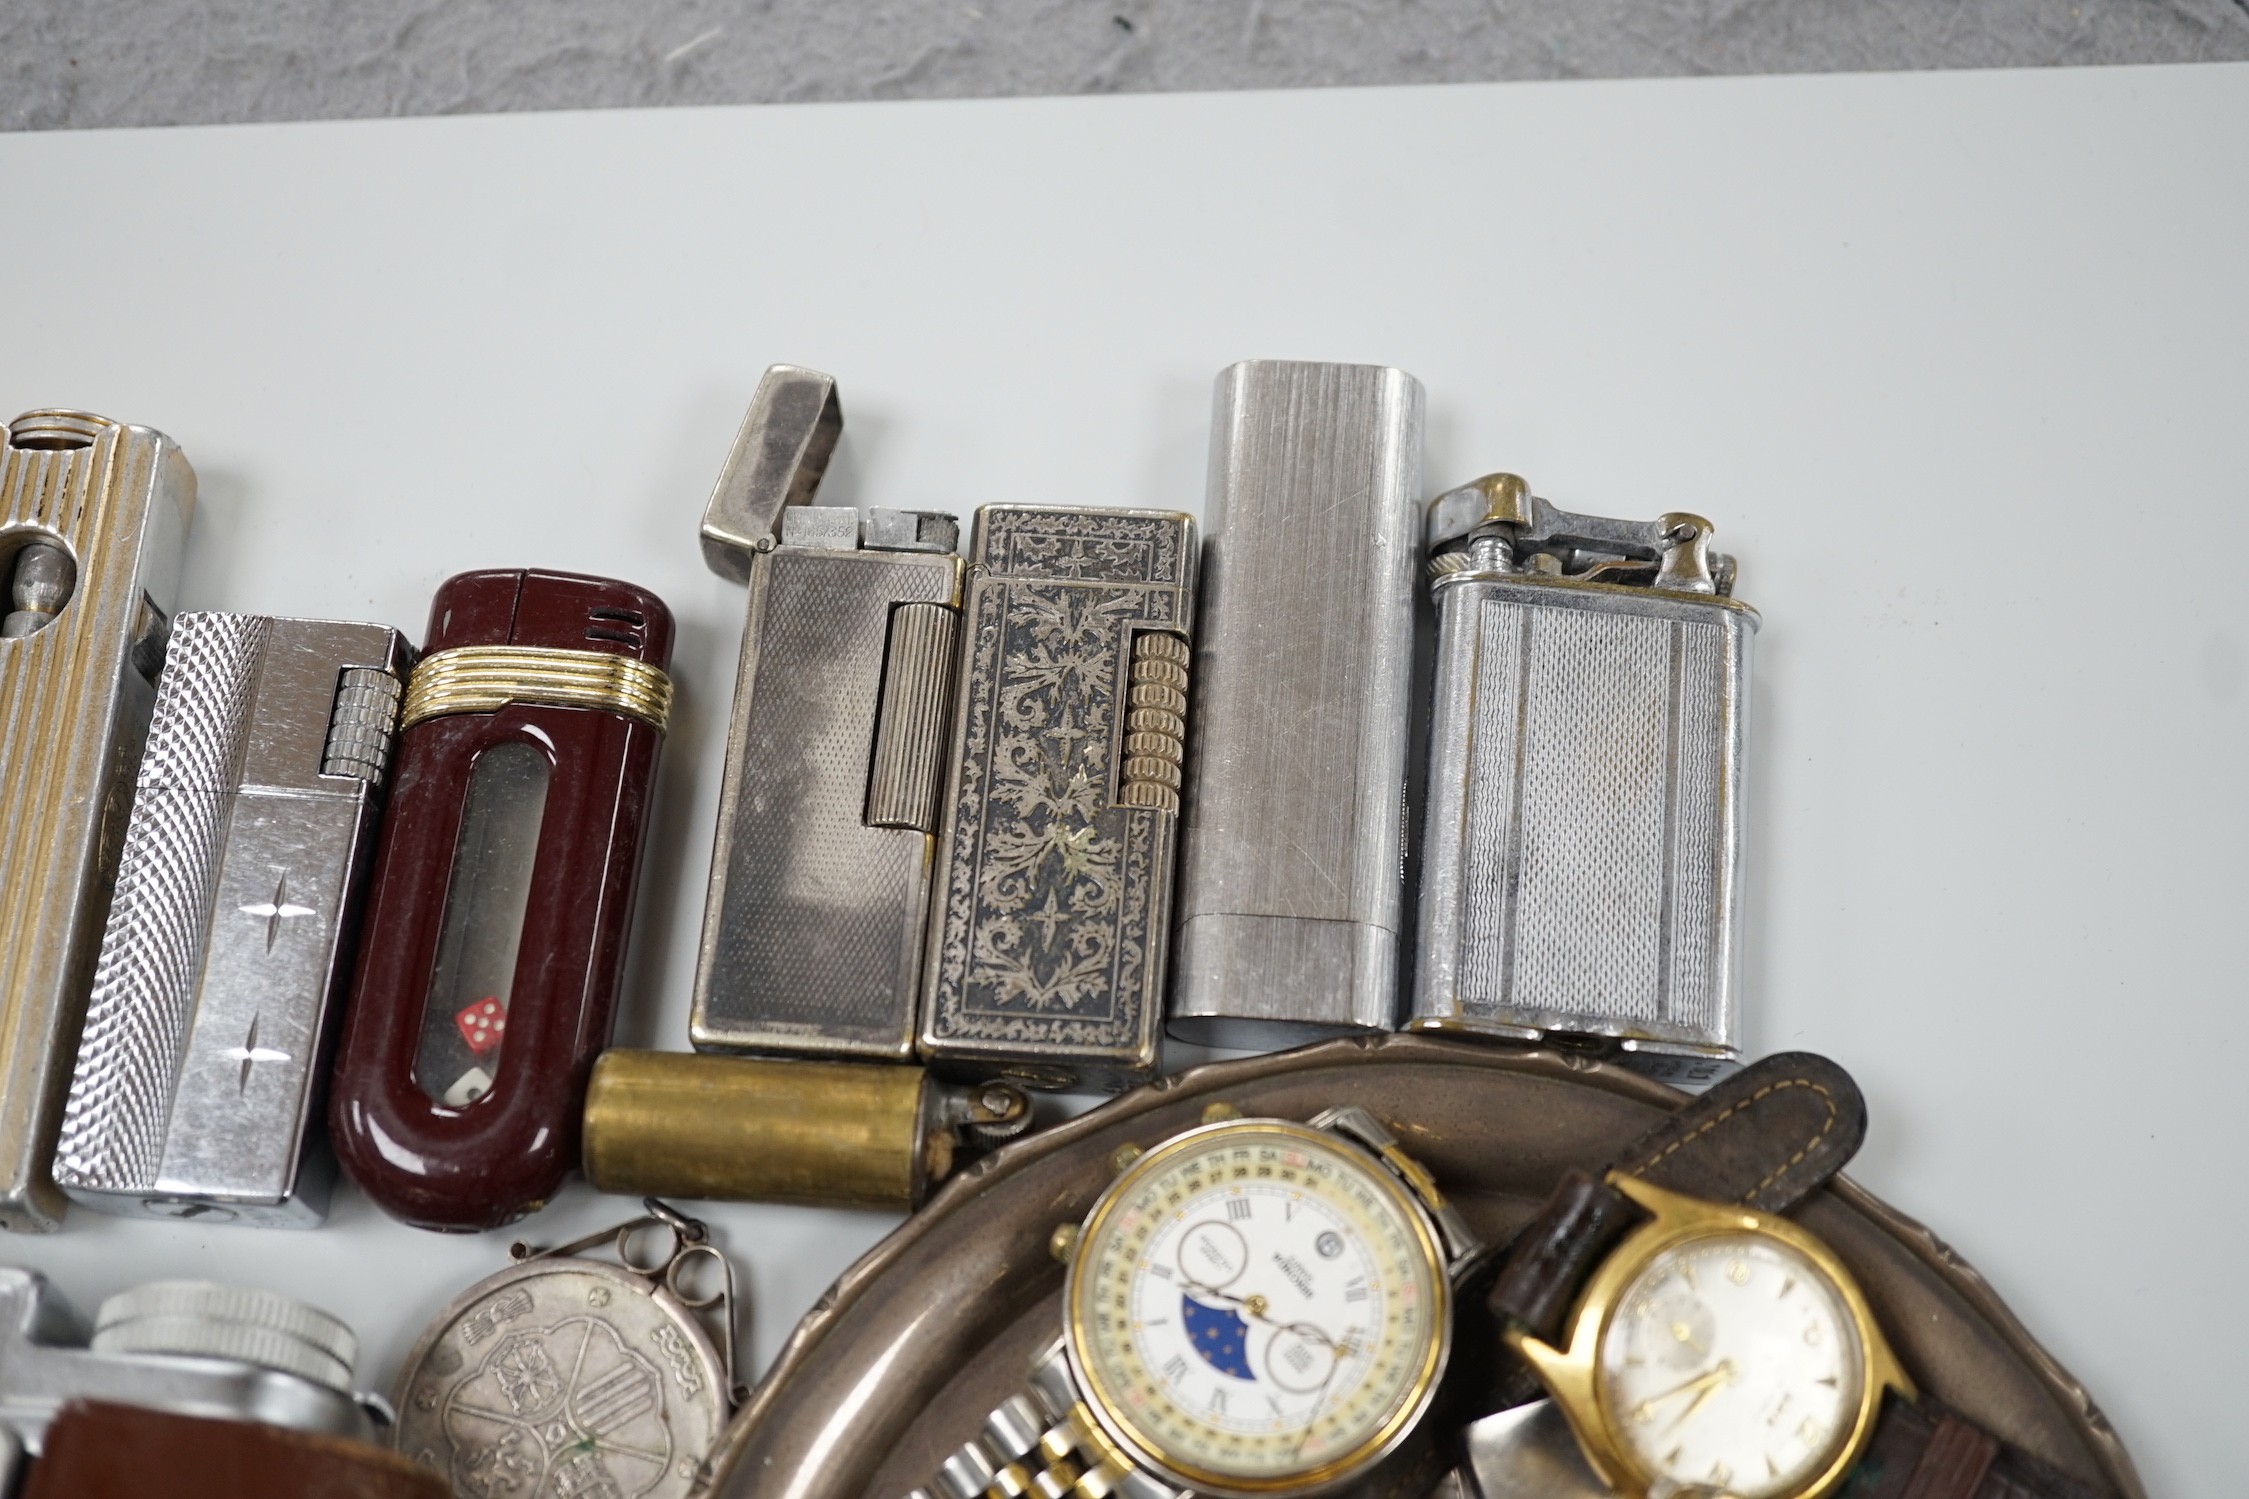 A collection of mixed wristwatches and cigarette lighters and a camera